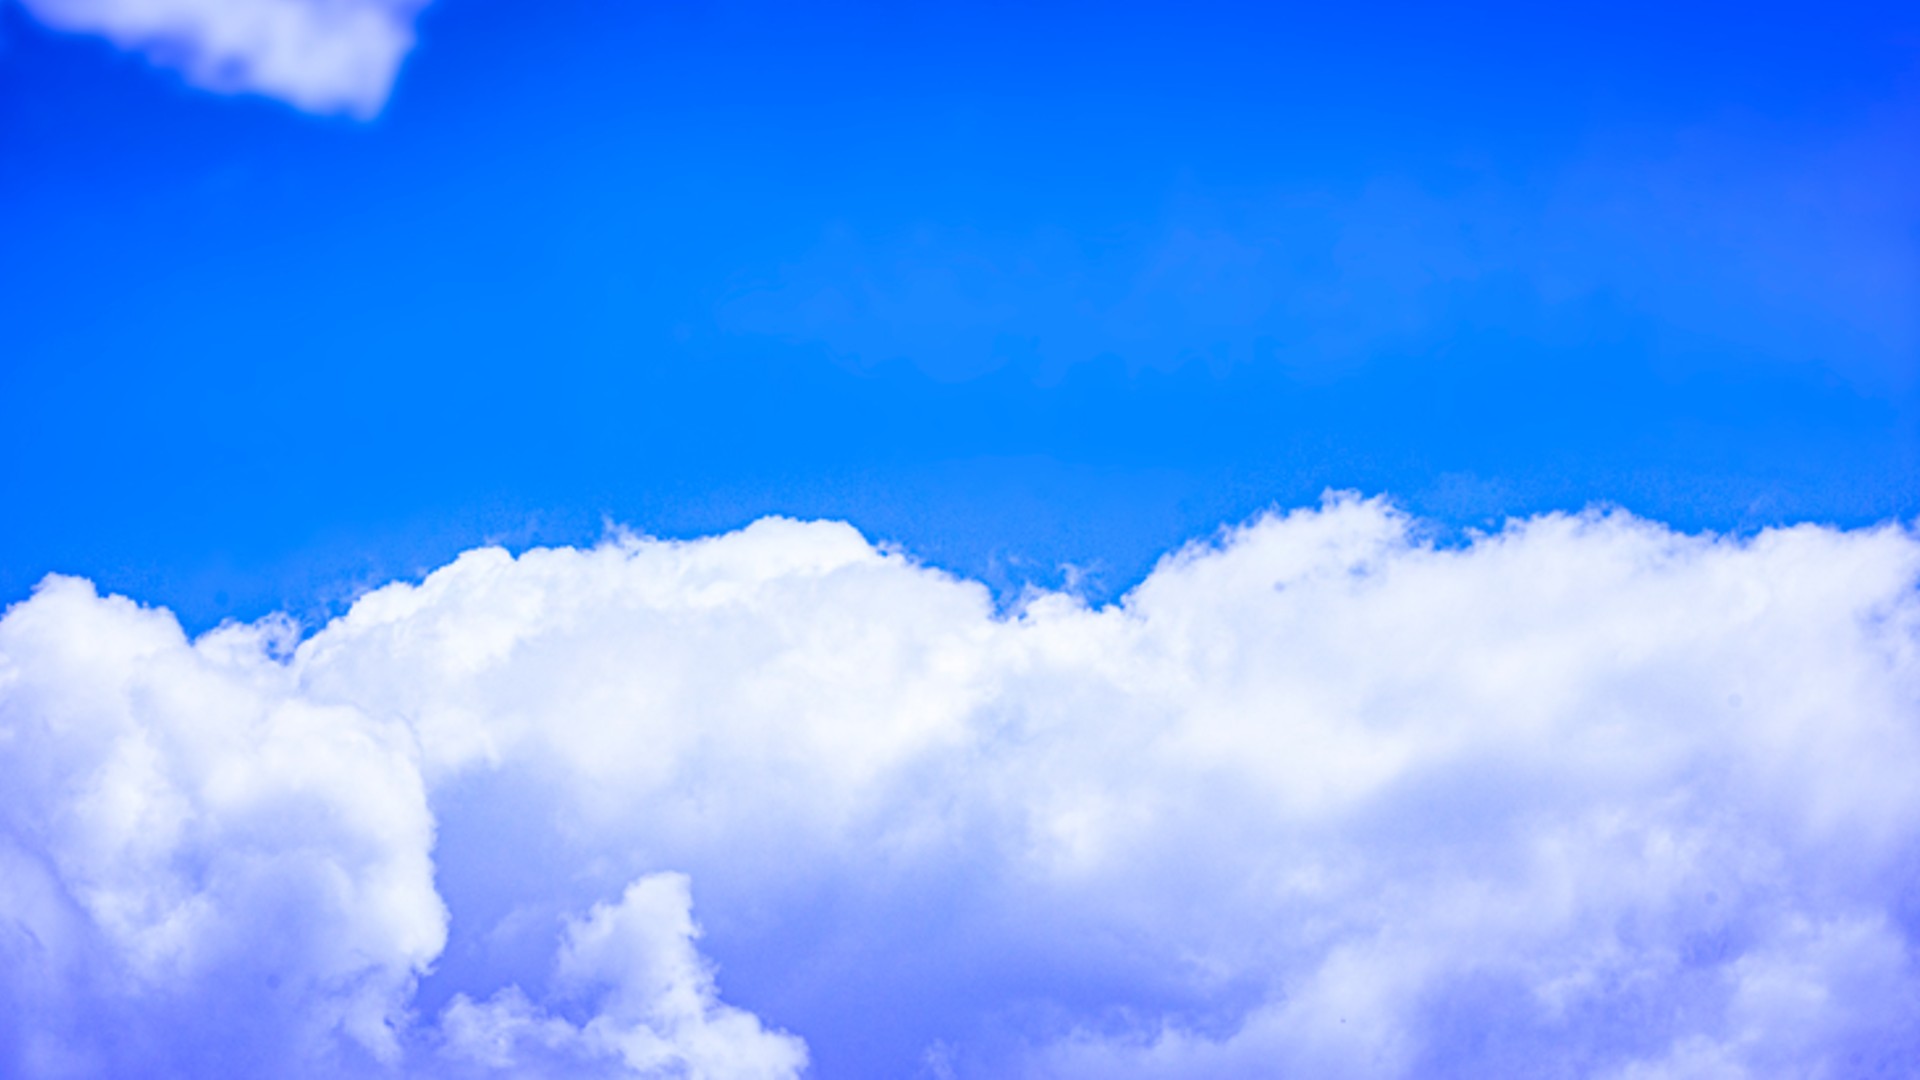 Image of clouds and blue sky